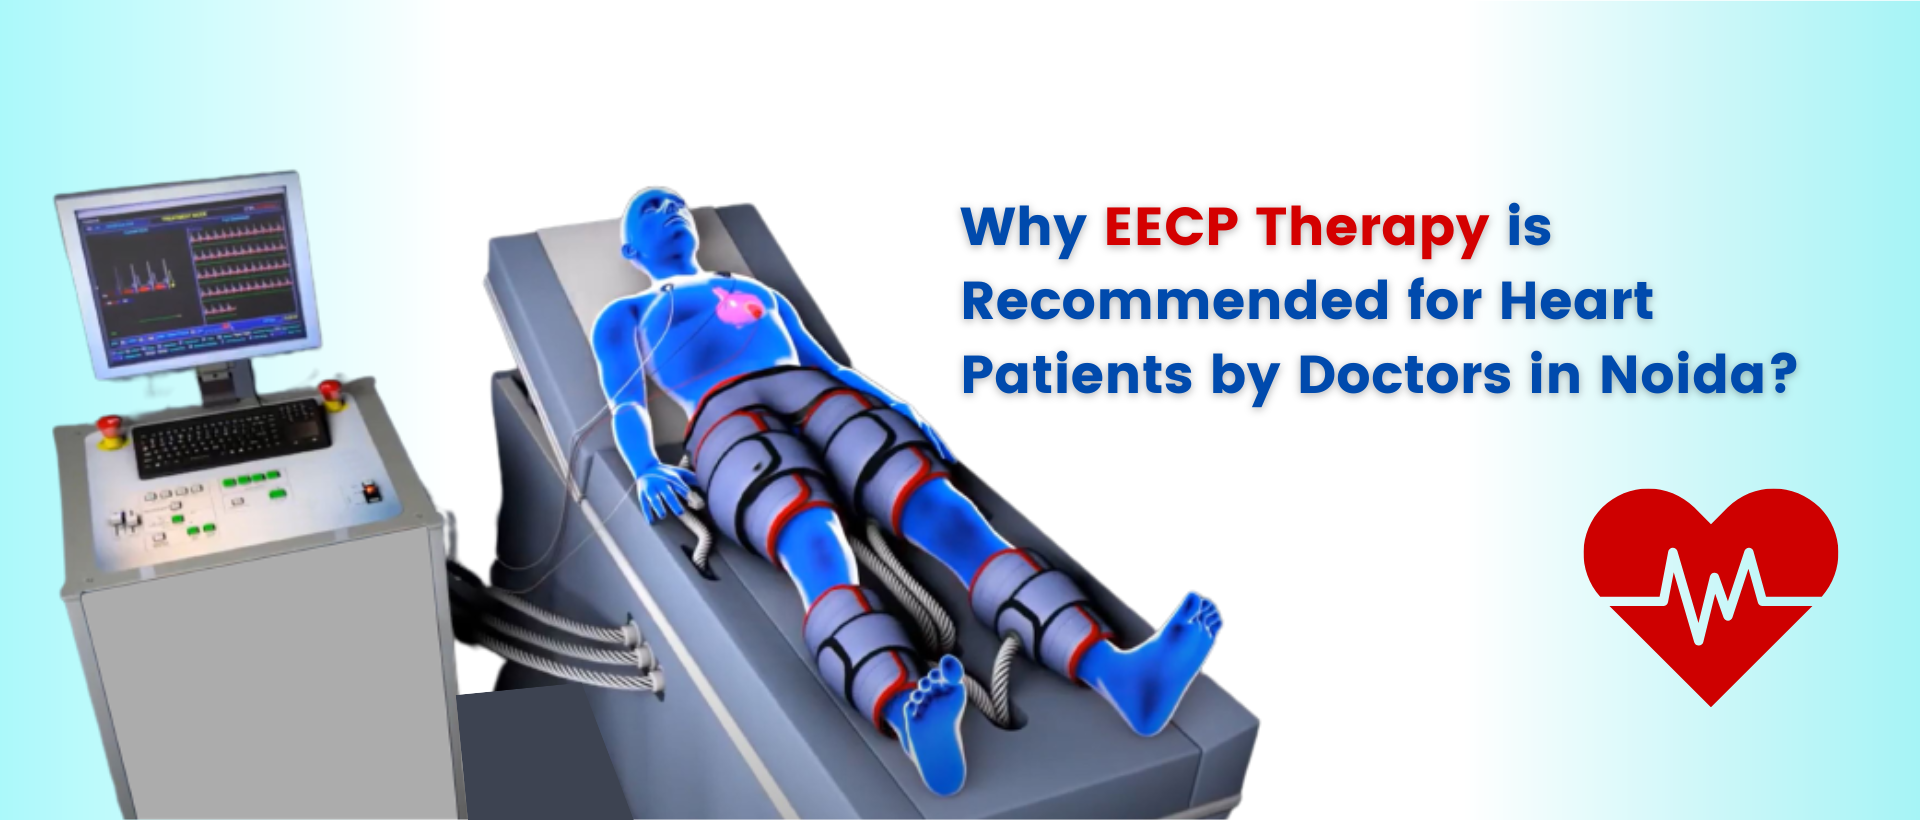 Why eecp therapy is recommended for heart patients by doctors in noida?